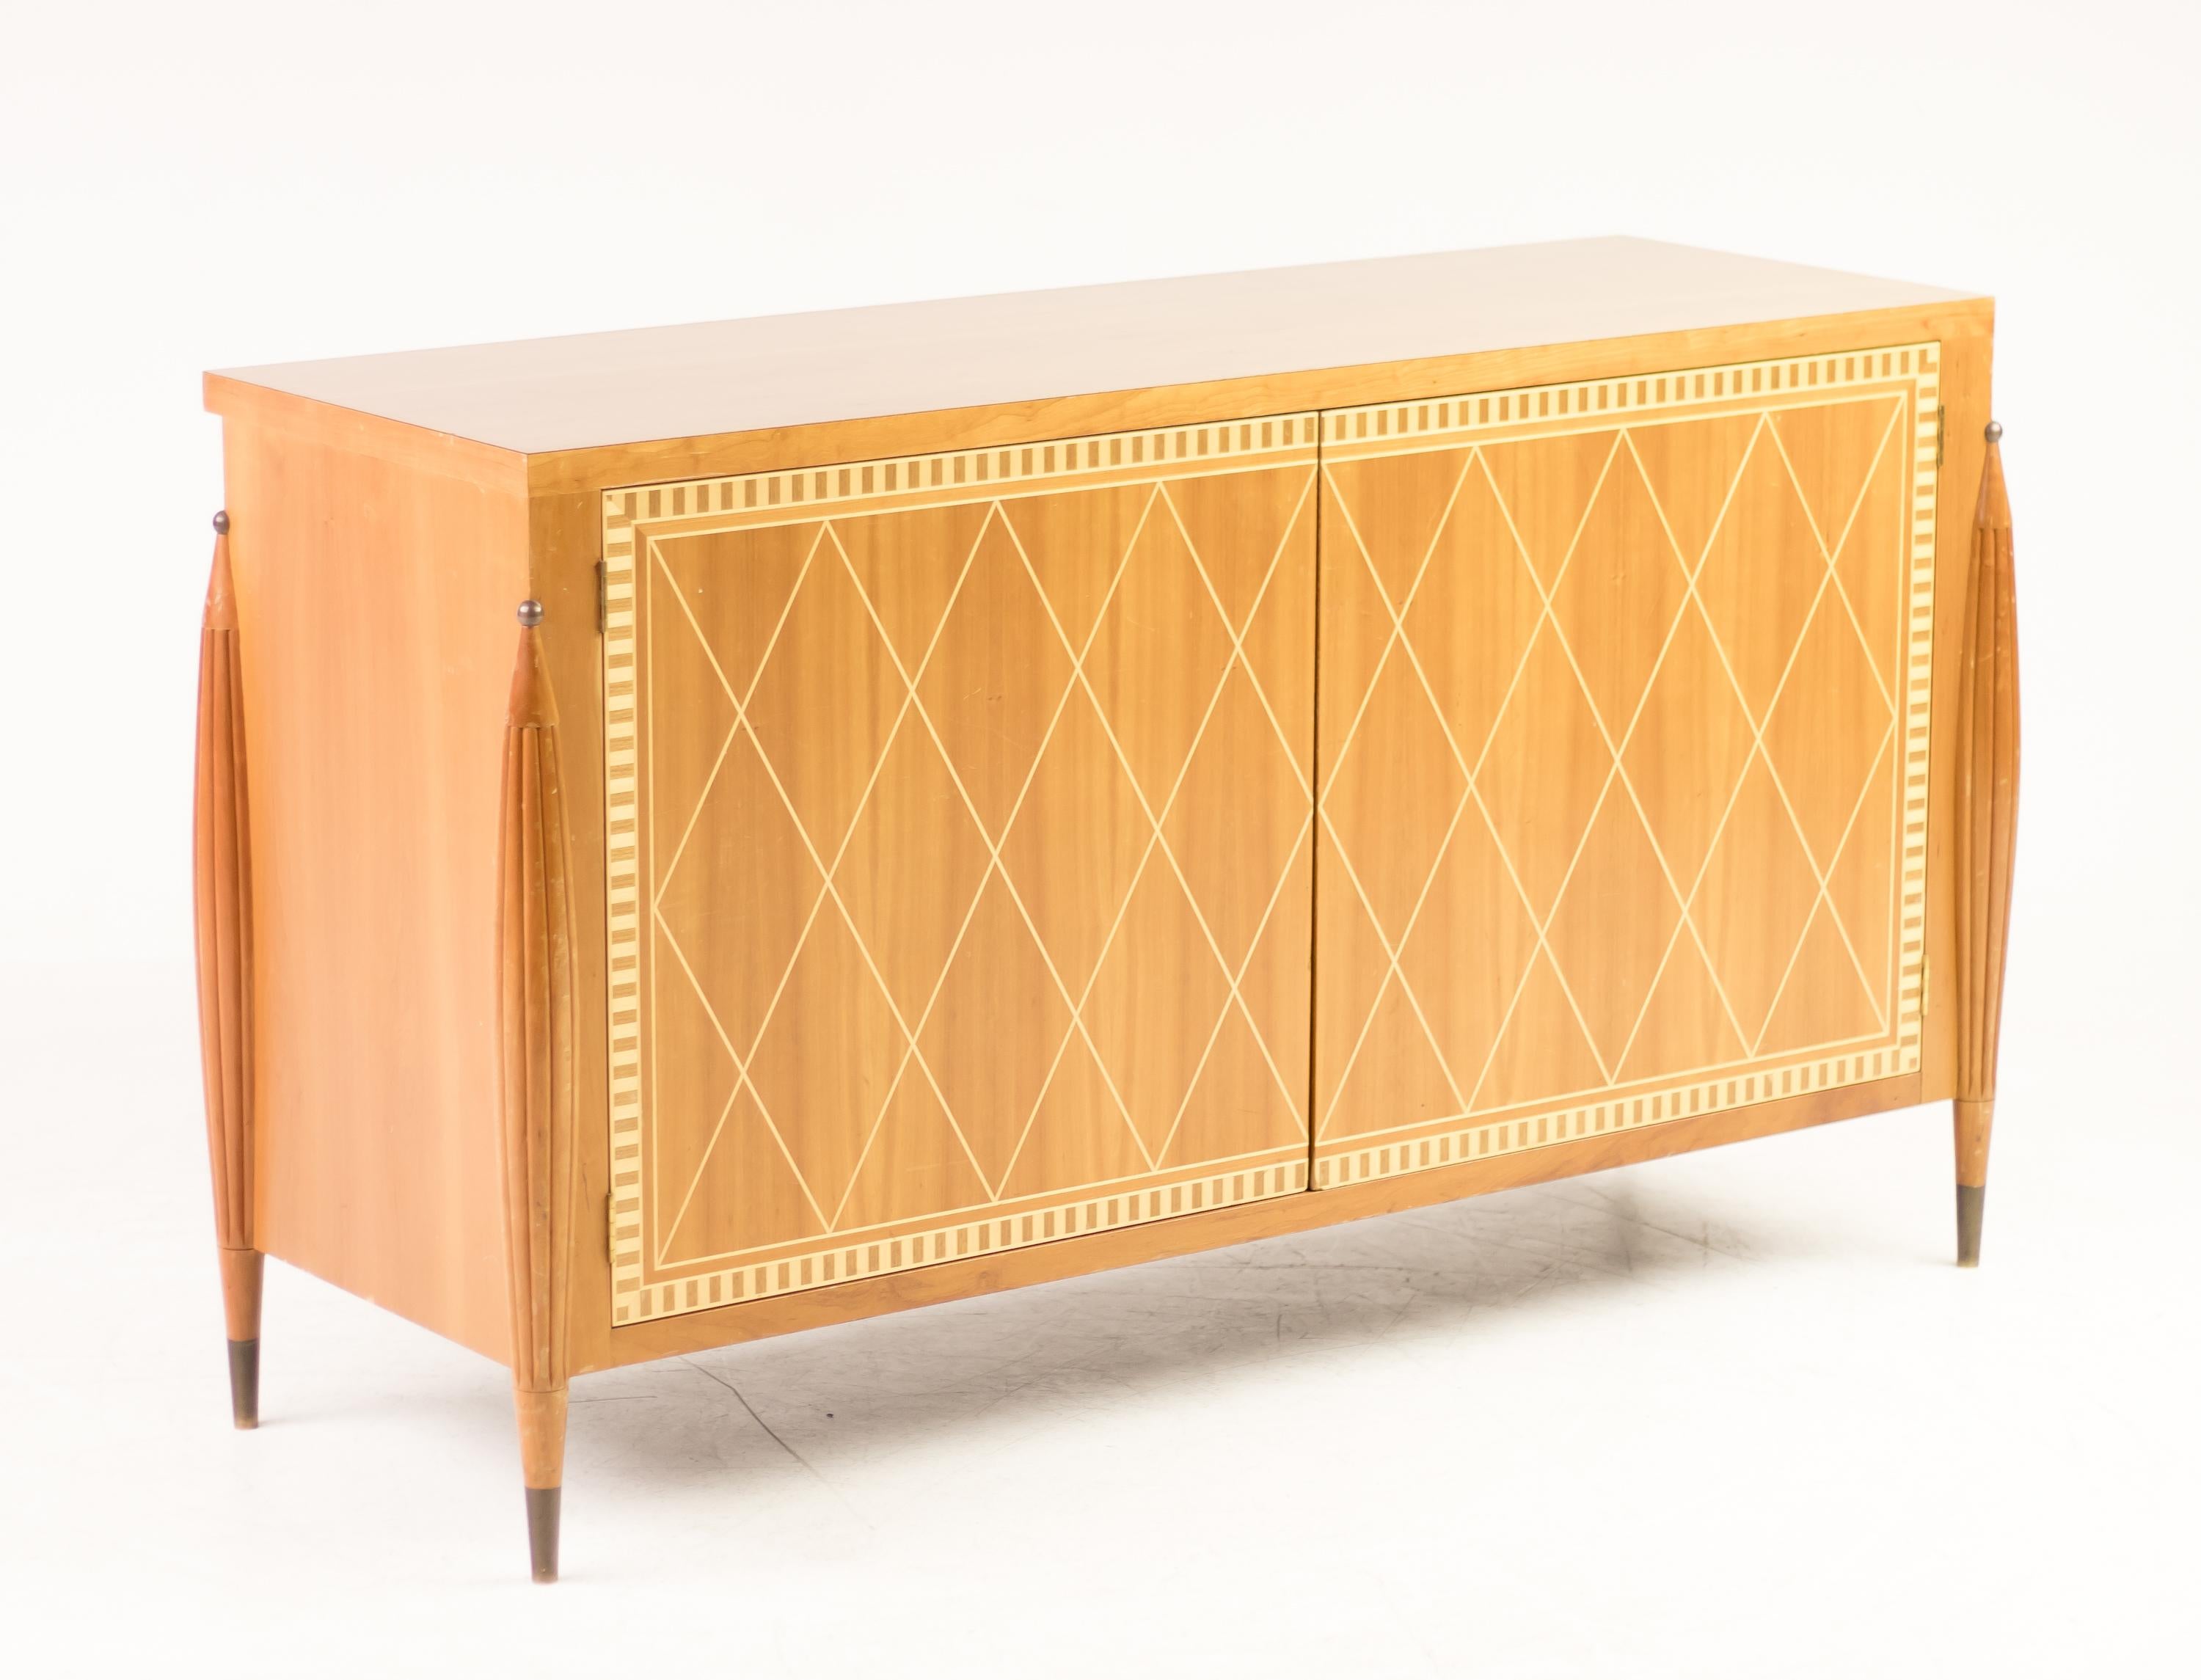 Italian Mid-Century Modern cabinet with beautiful modern marquetry in European walnut and sycamore.
Delicately sculpted legs with brass details. Exceptional piece.
The shelves are no longer present, but new shelves can be made upon